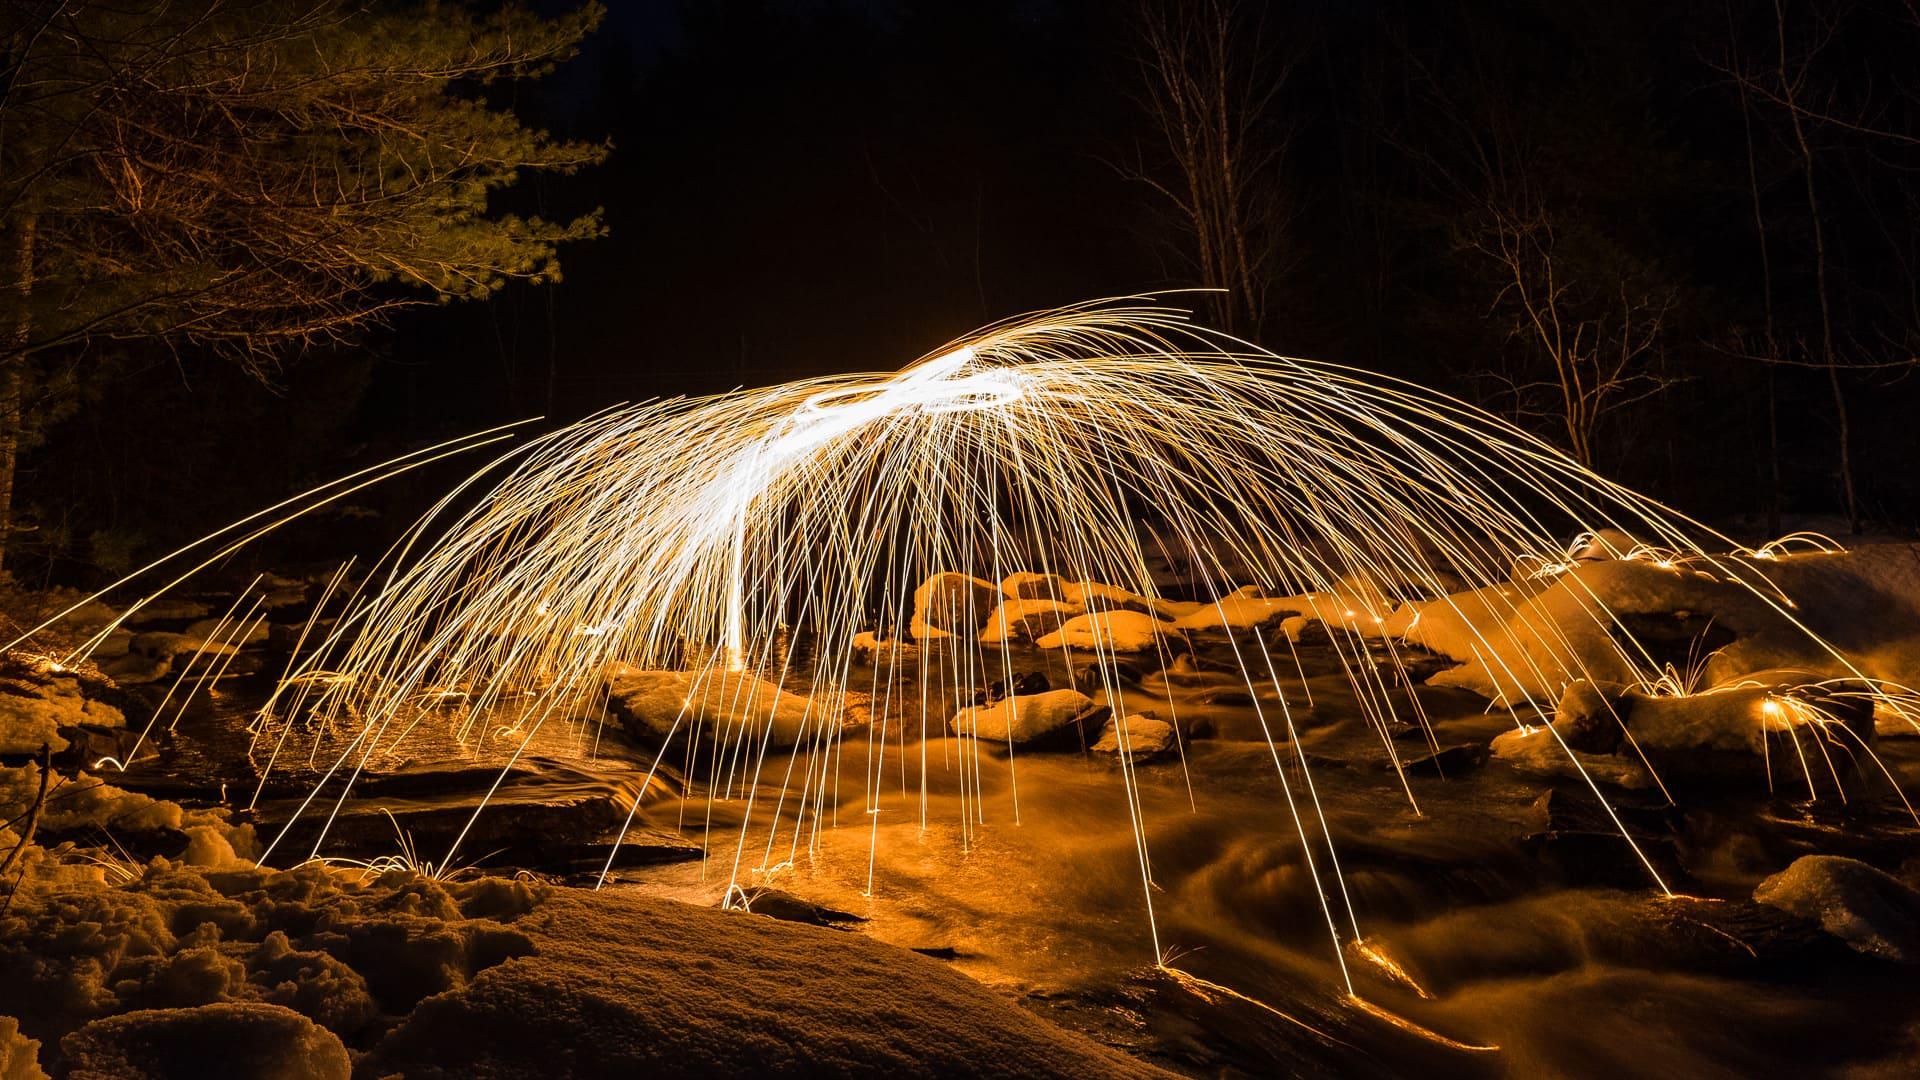 steel wool spinning tips for long exposure photographs